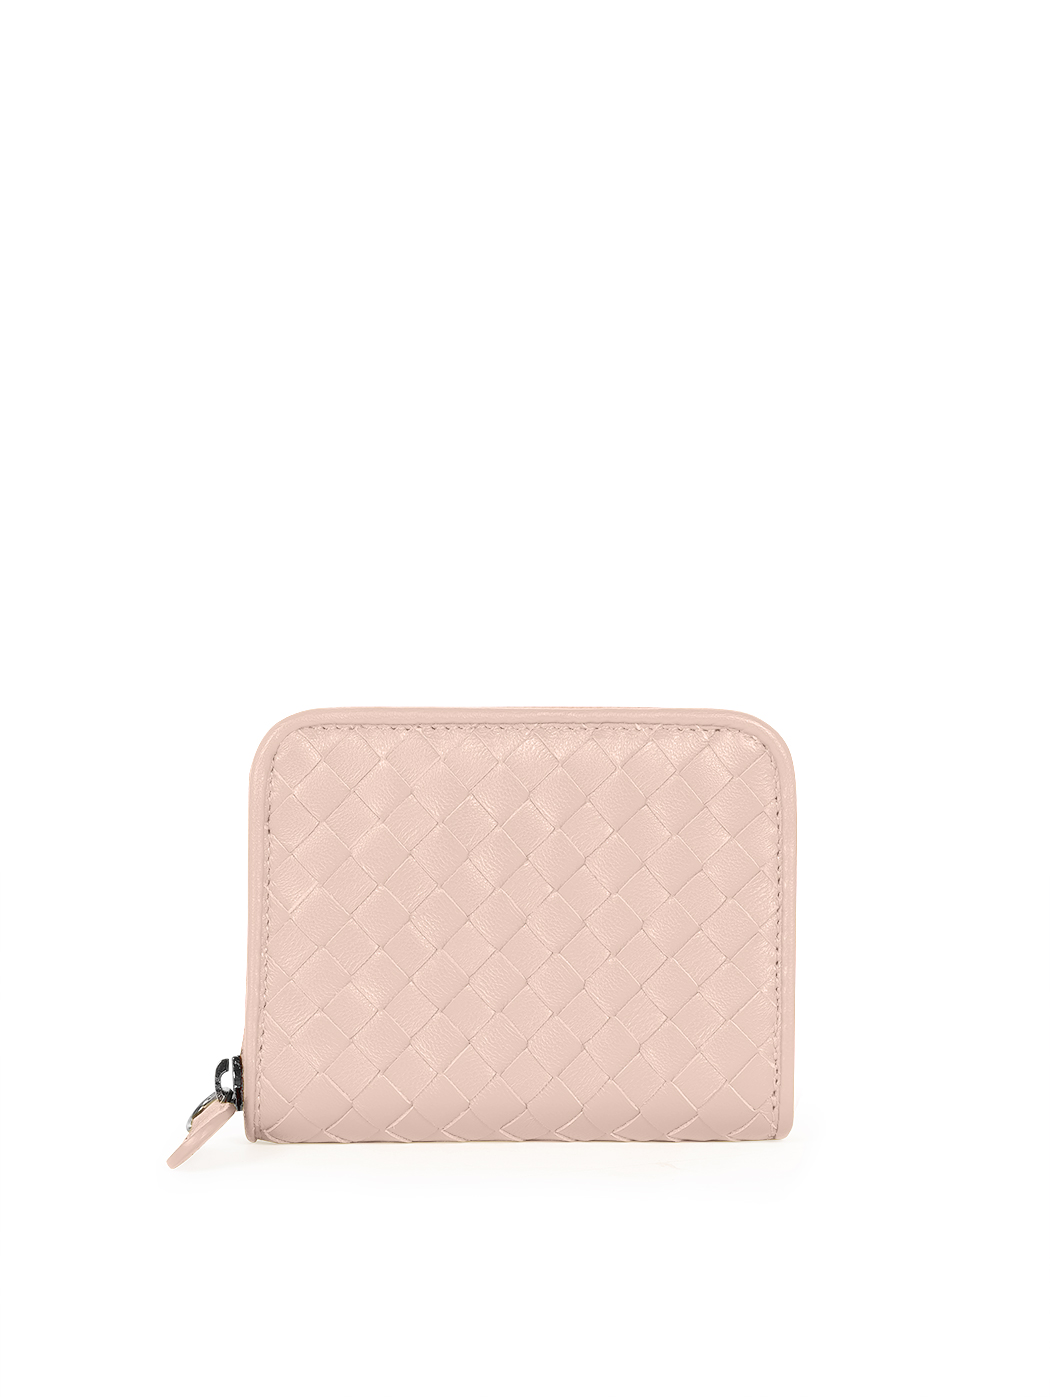 Compact zip-around wallet in pink woven leather